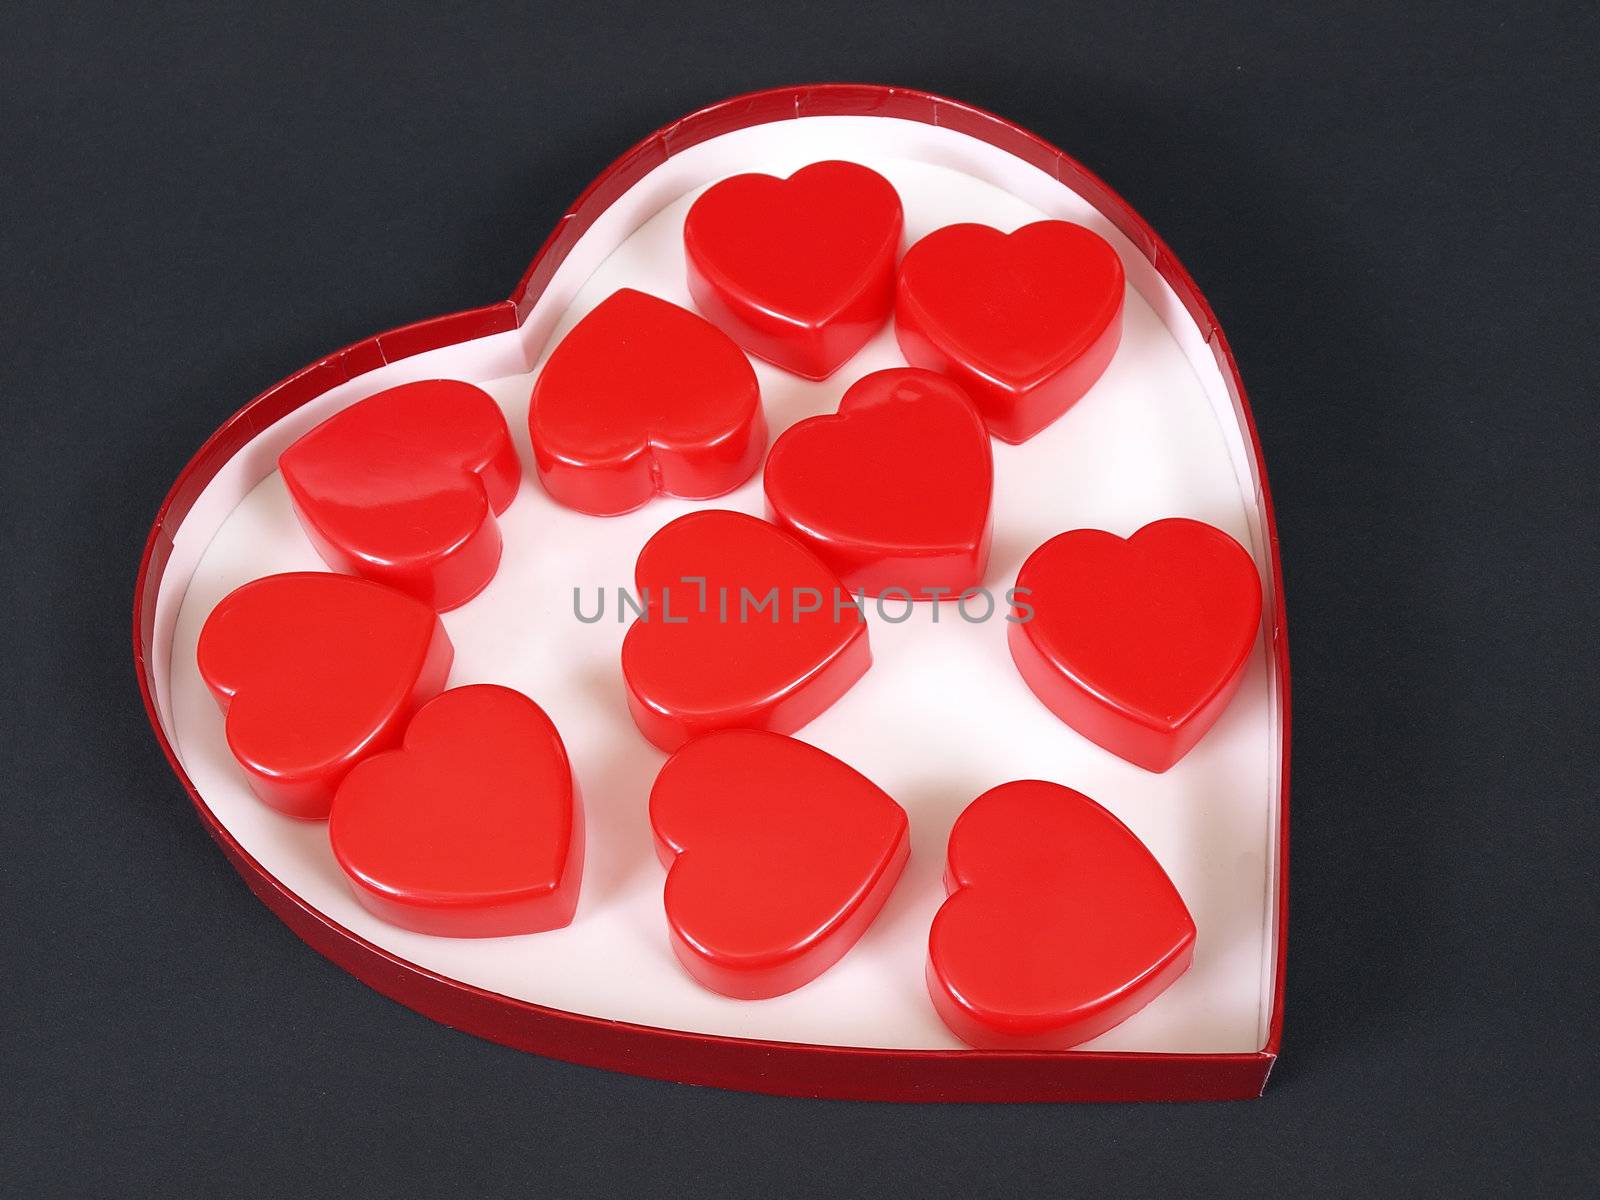 A heart shaped box filled with red heart shapes over a black background.